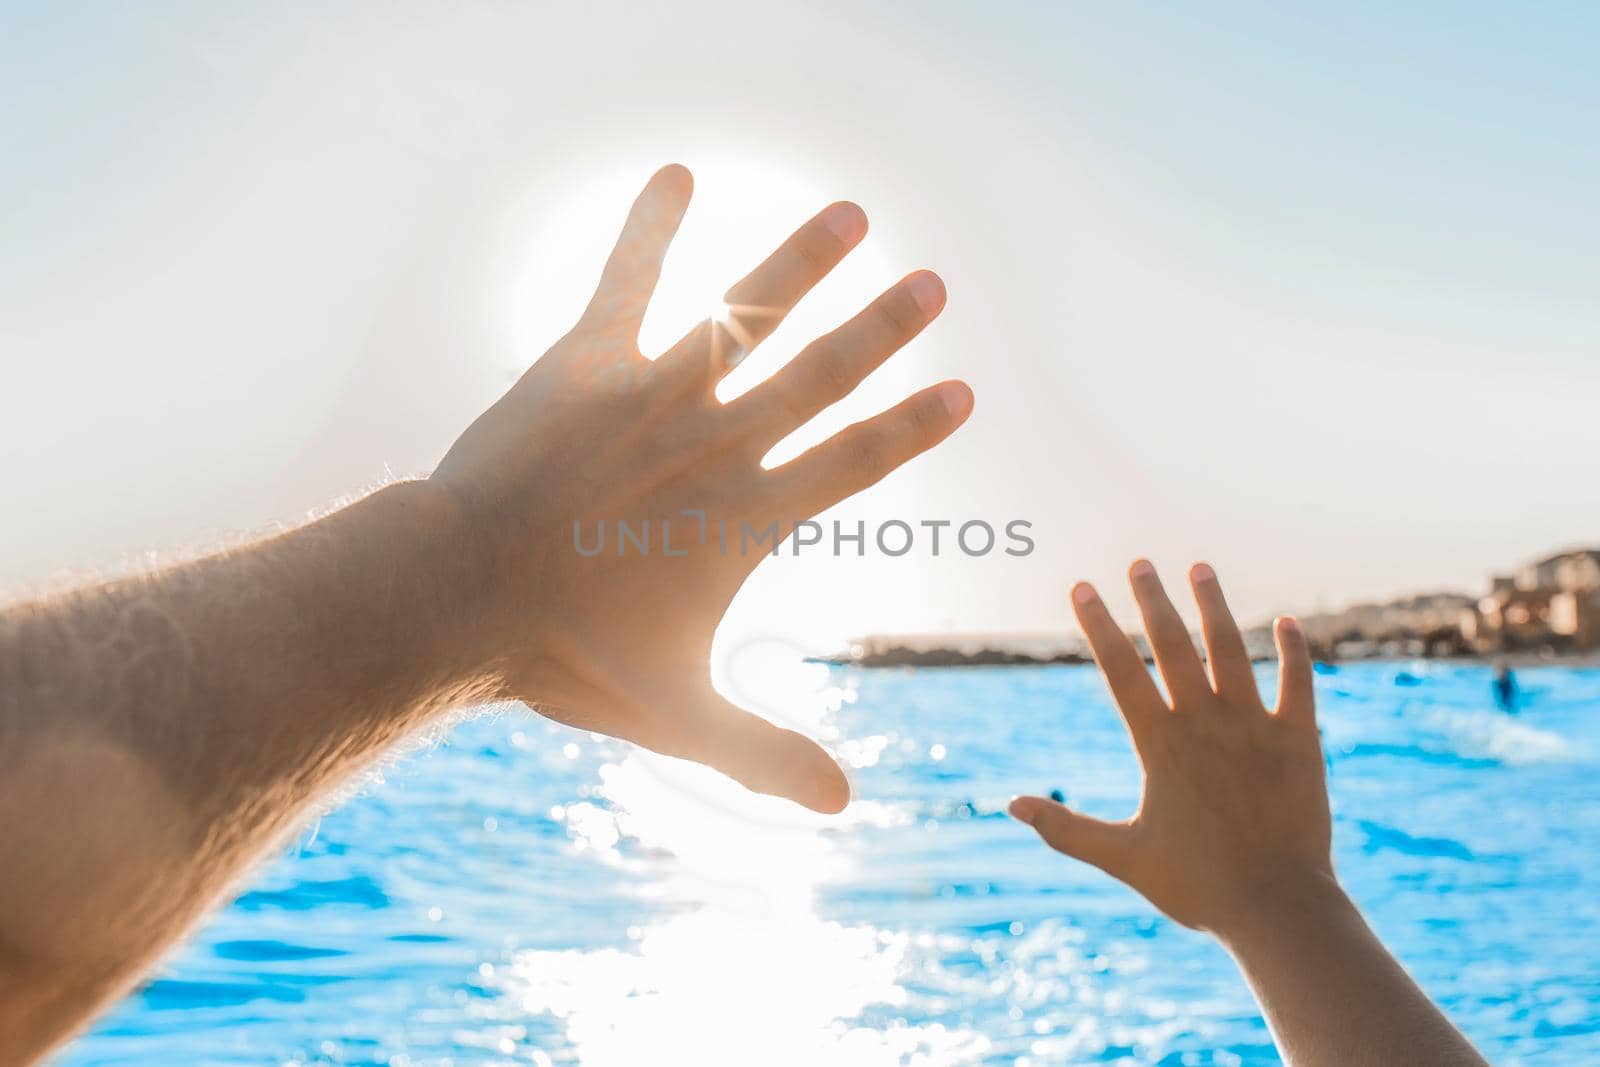 The silhouette of the man's hands and the chewing arms waving against the bright sunny sky, the blue sea and the horizon line.